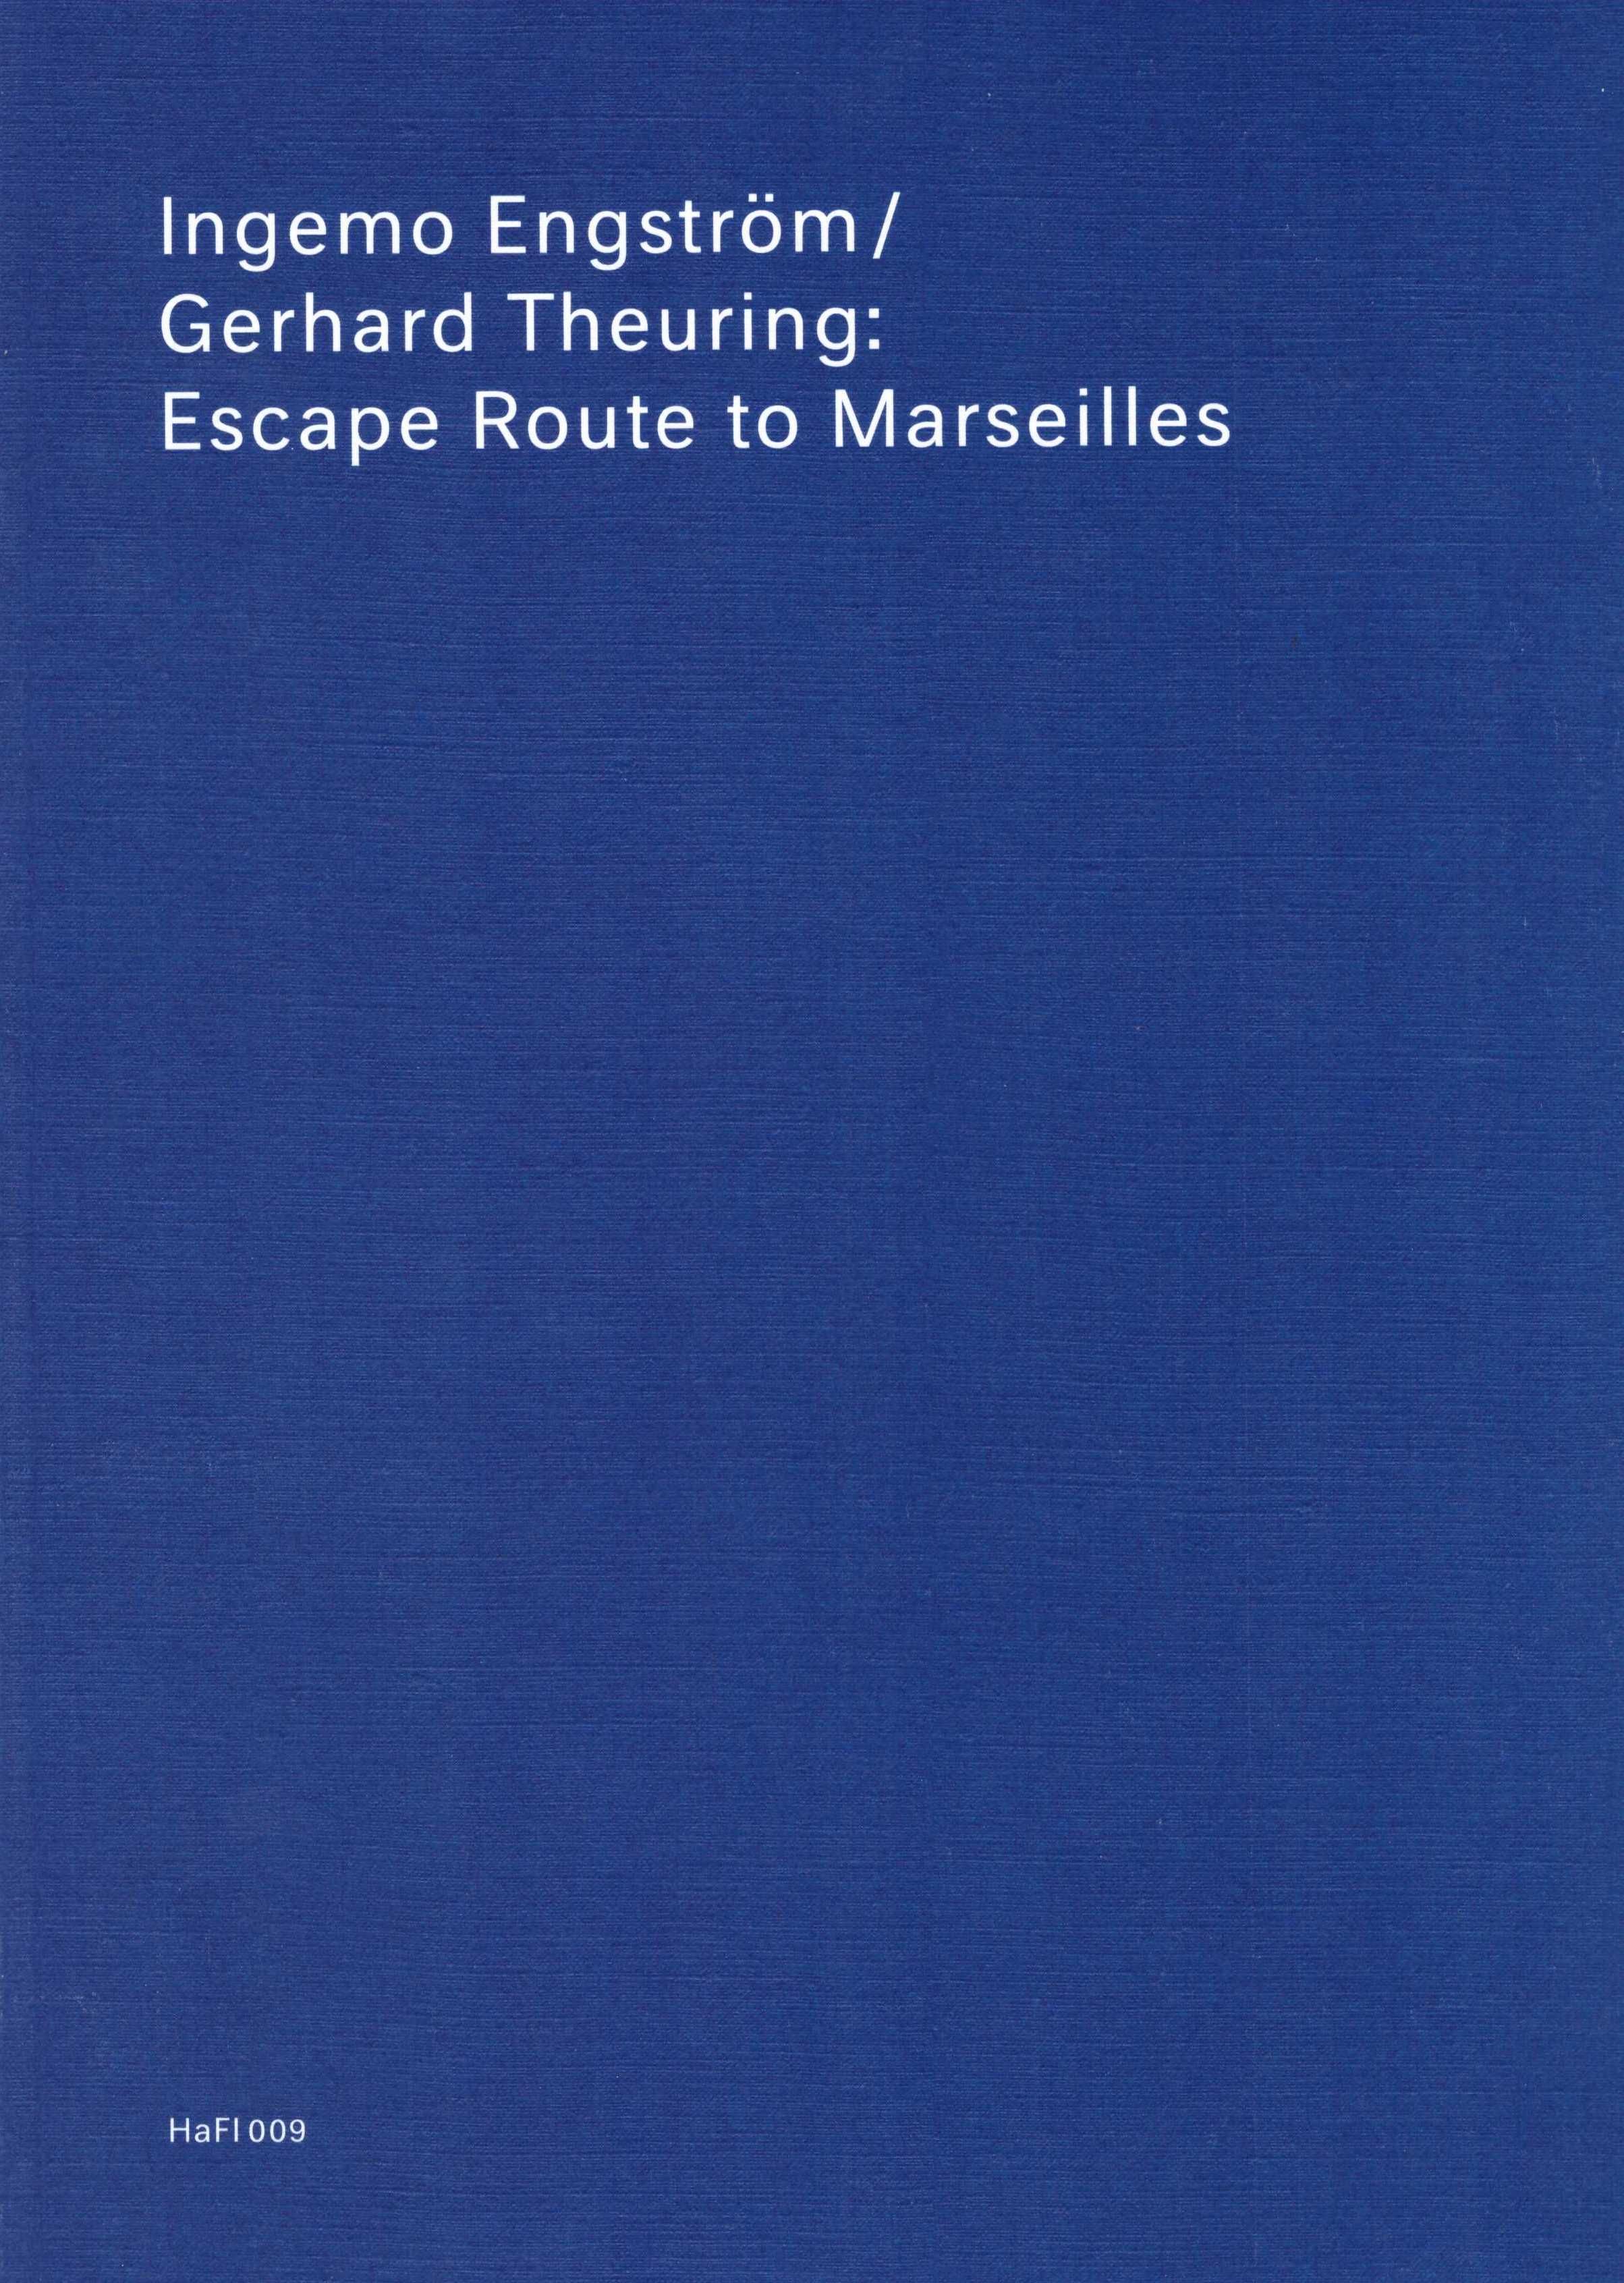 ENGSTRÖM, Ingemo; THEURING, Gerhard - Escape Route to Marseilles